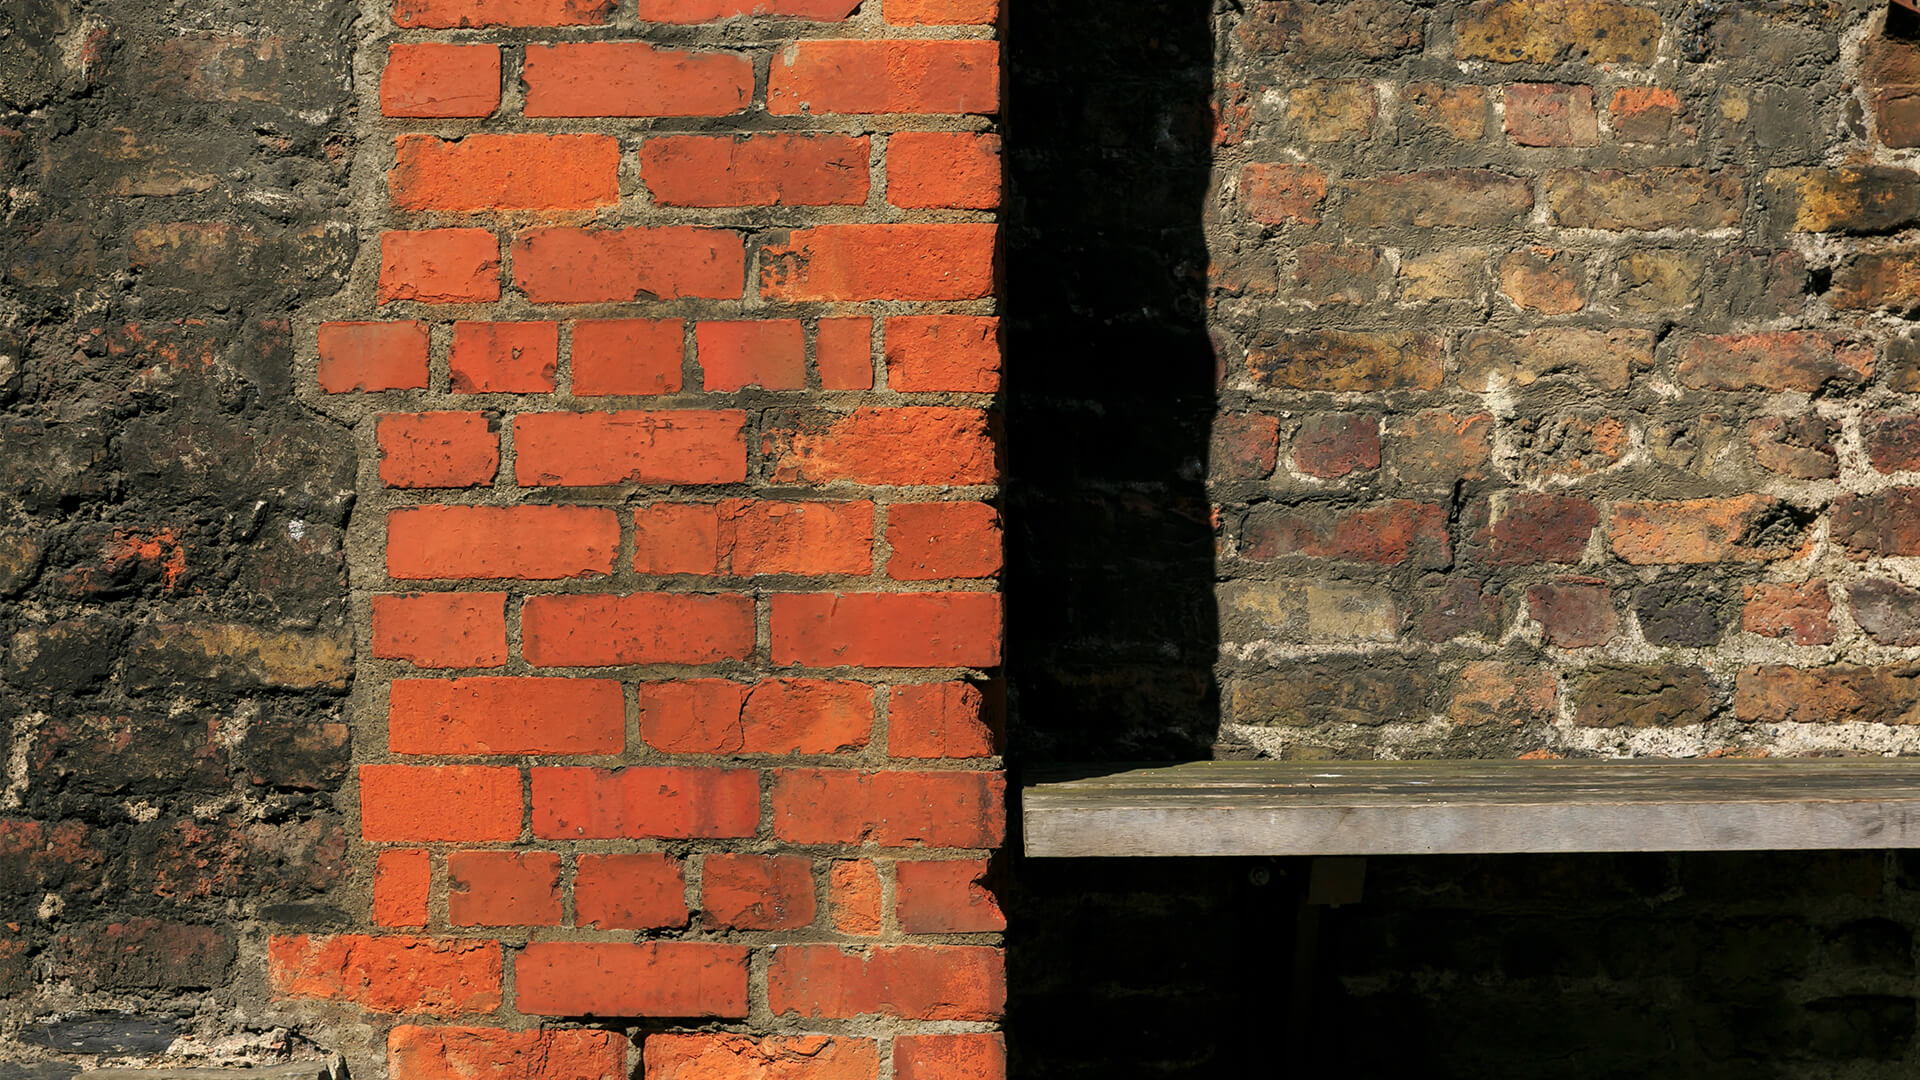 A close-up detail of a wall featuring bright orange bricks contrasting with older brown bricks